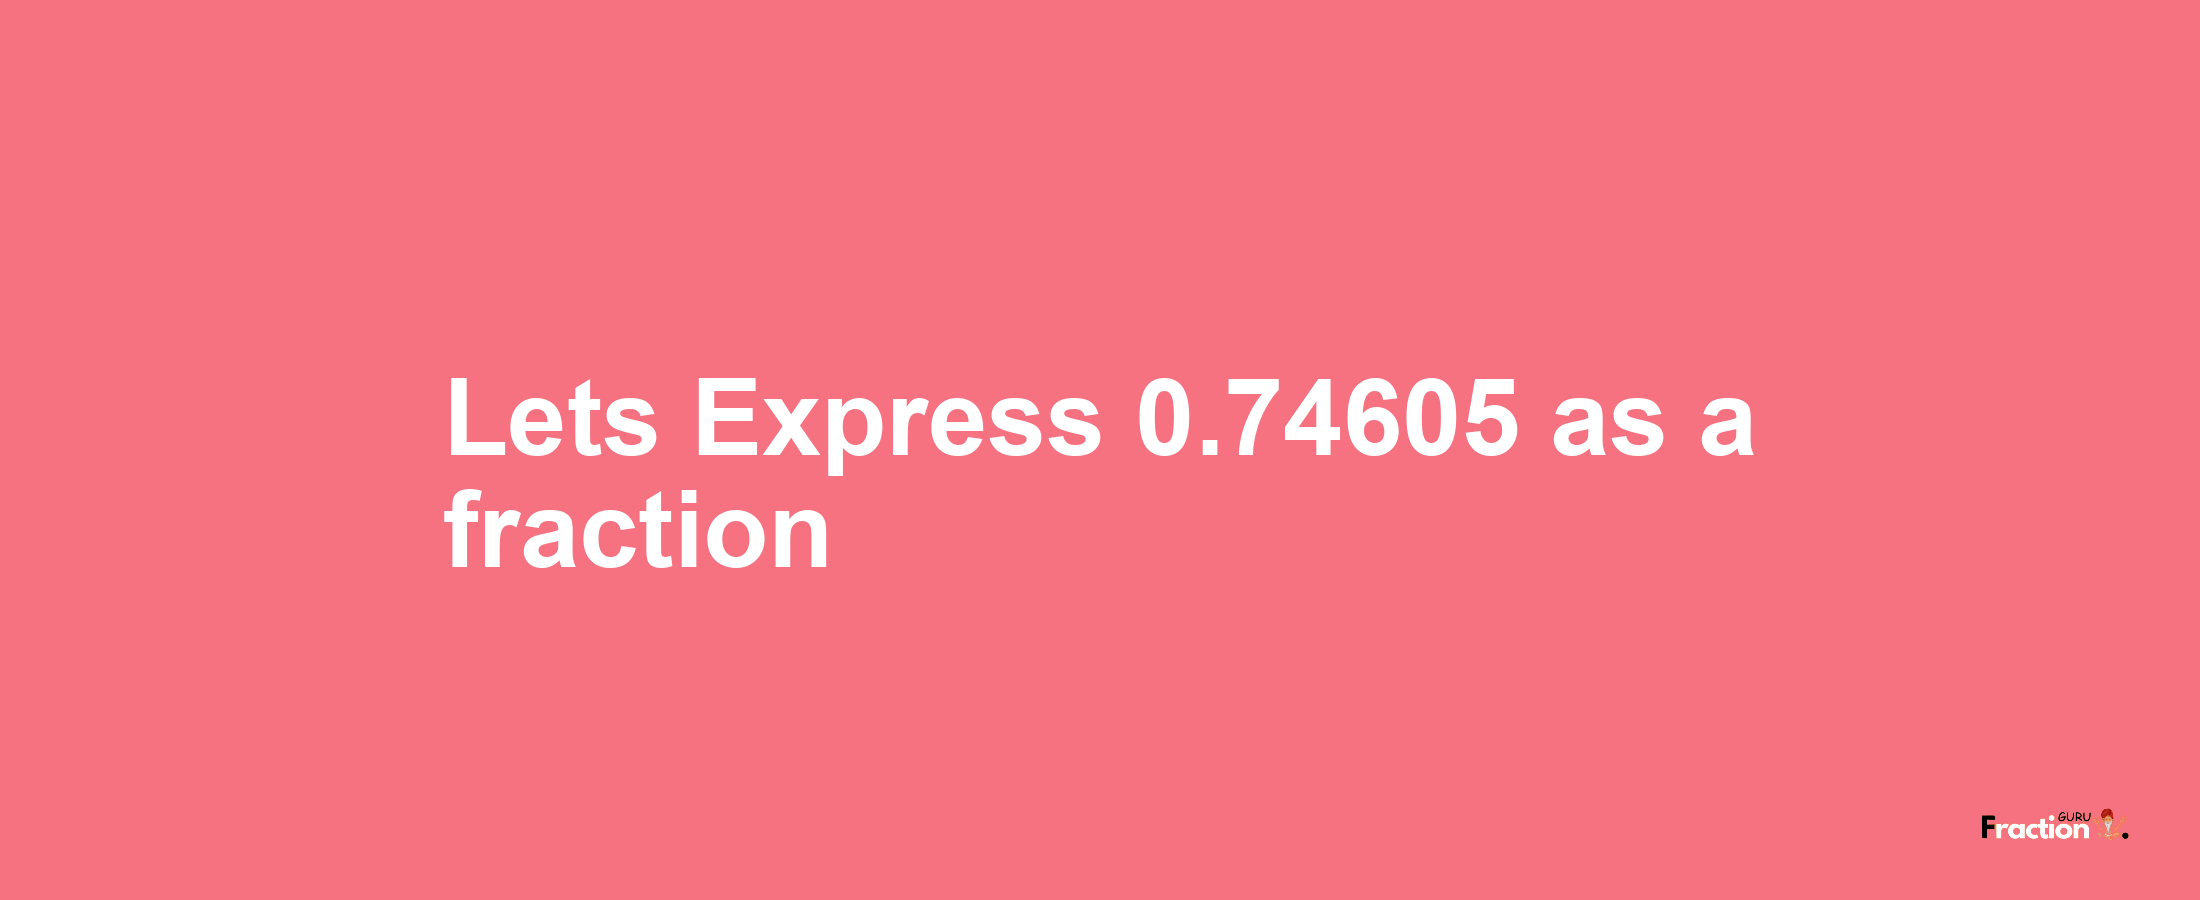 Lets Express 0.74605 as afraction